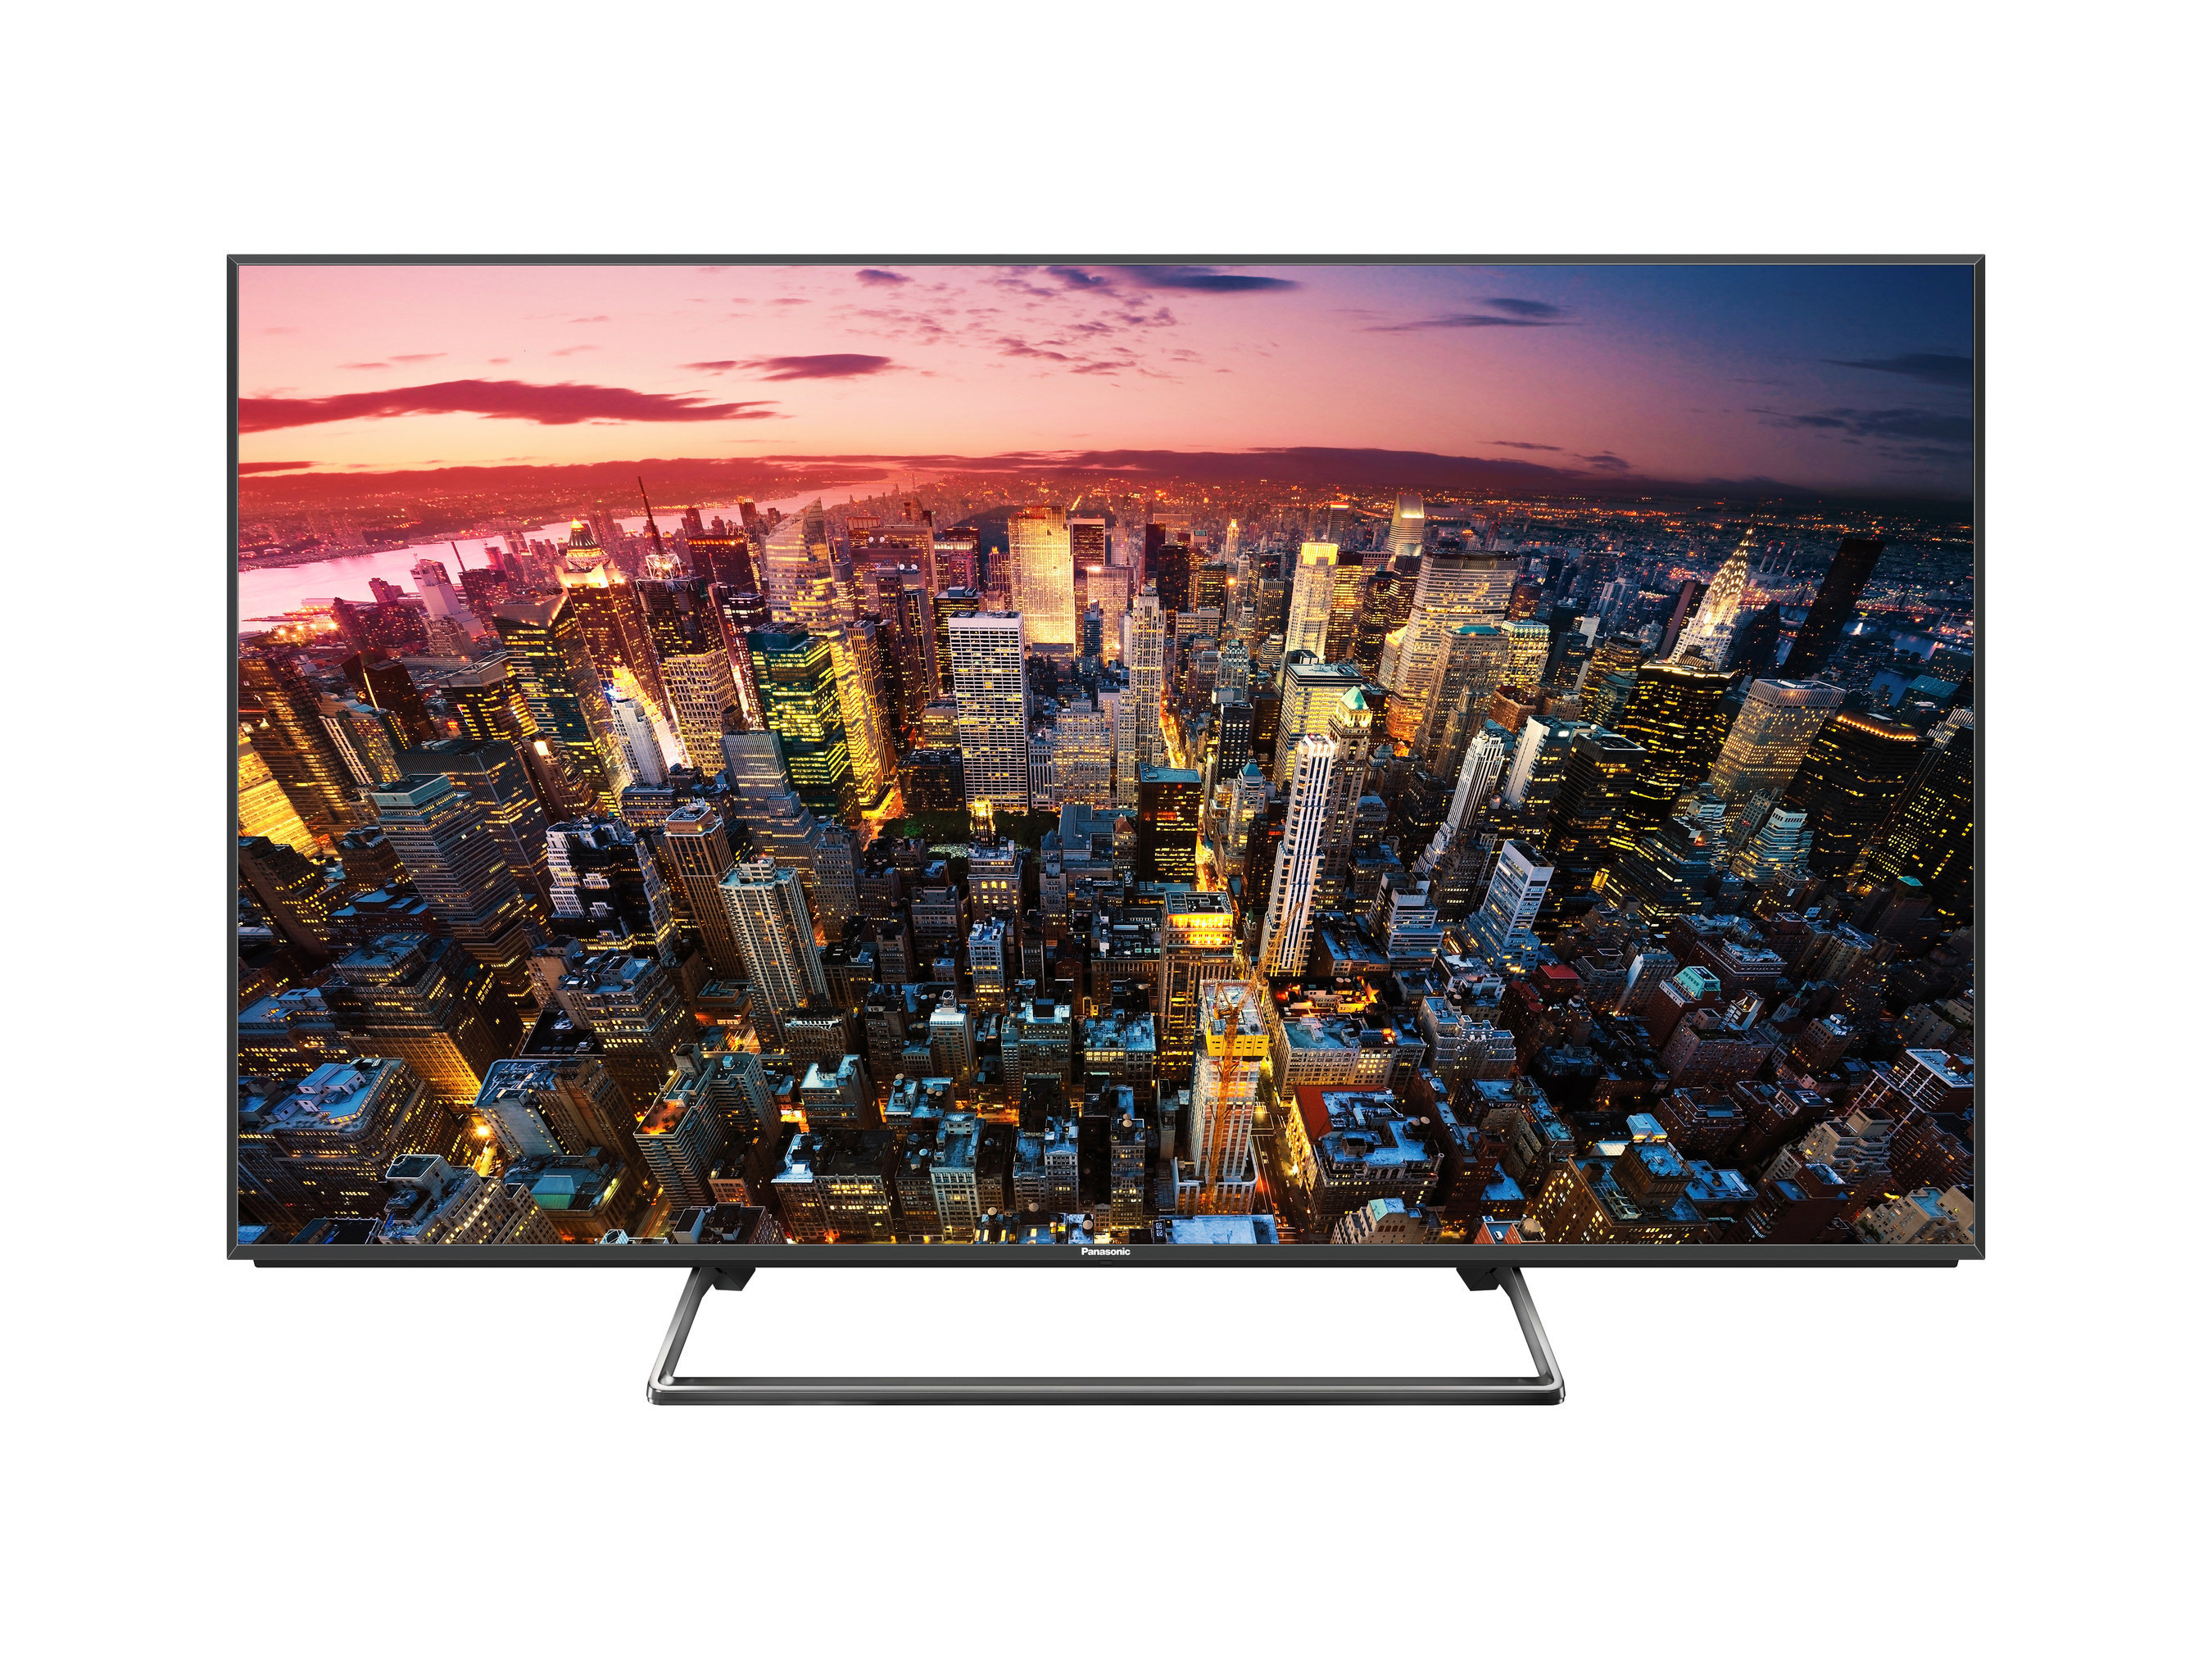 Panasonic's 2015 Line-Up of 4K Ultra HD Smart TVs Receives "Netflix Recommended" Designation